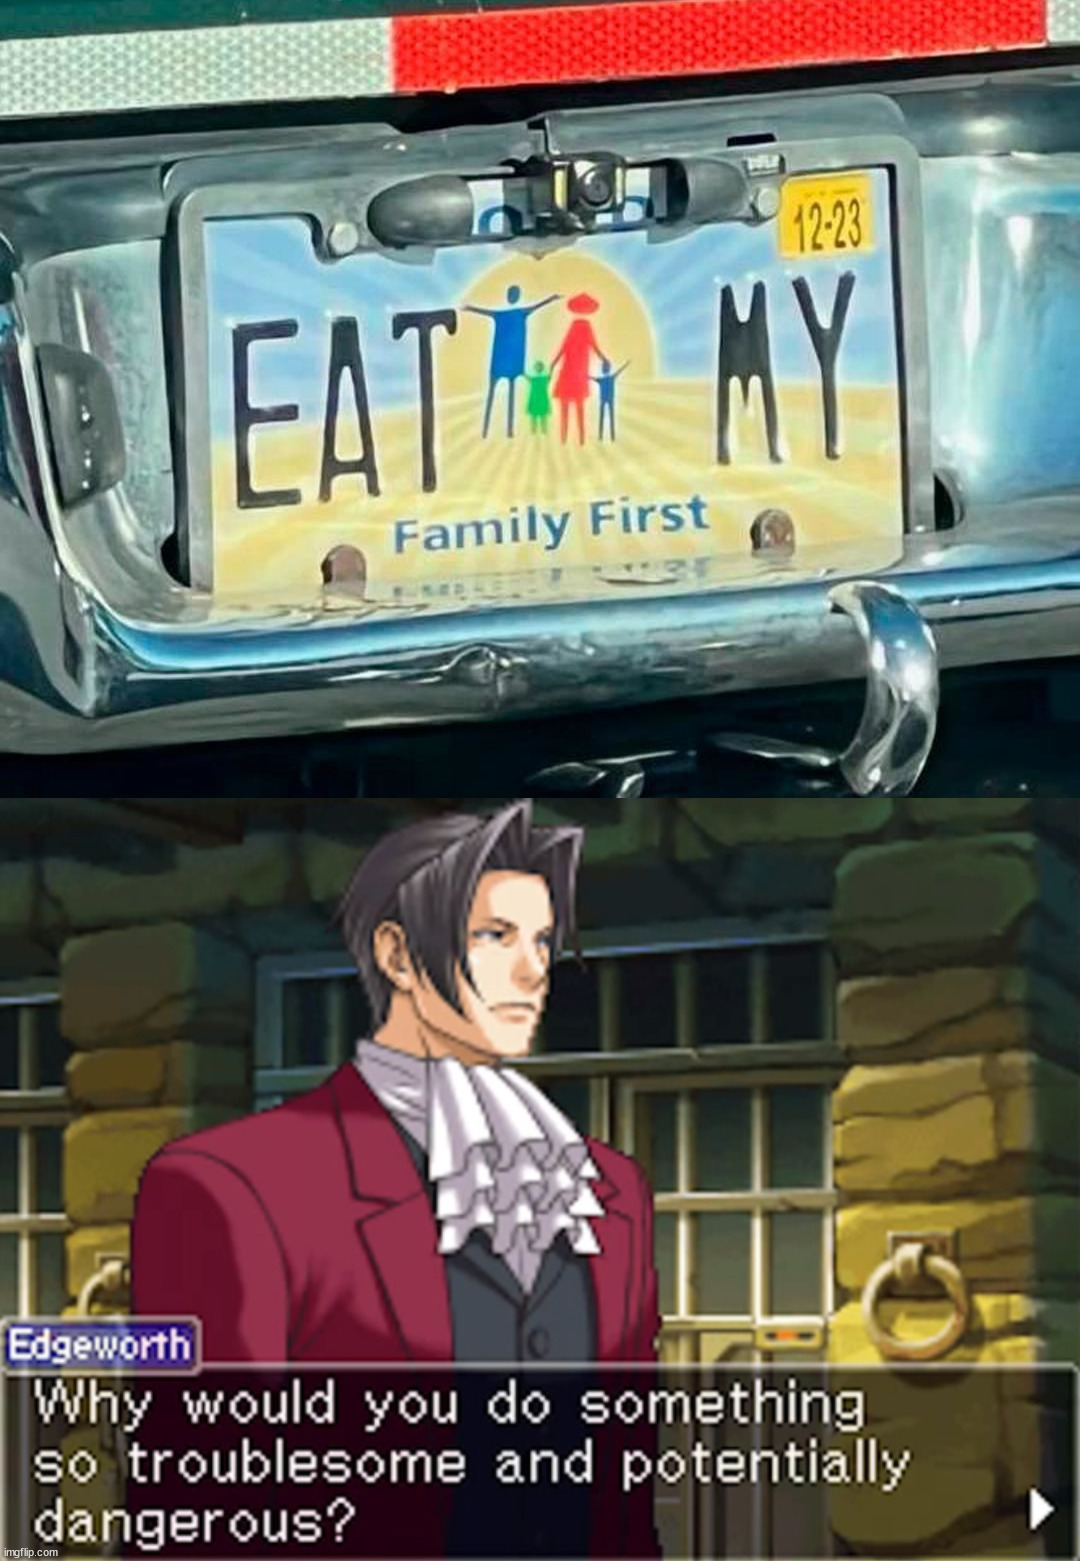 I would not get in this car | image tagged in edgeworth,license plate,what am i doing with my life,why would they do this | made w/ Imgflip meme maker